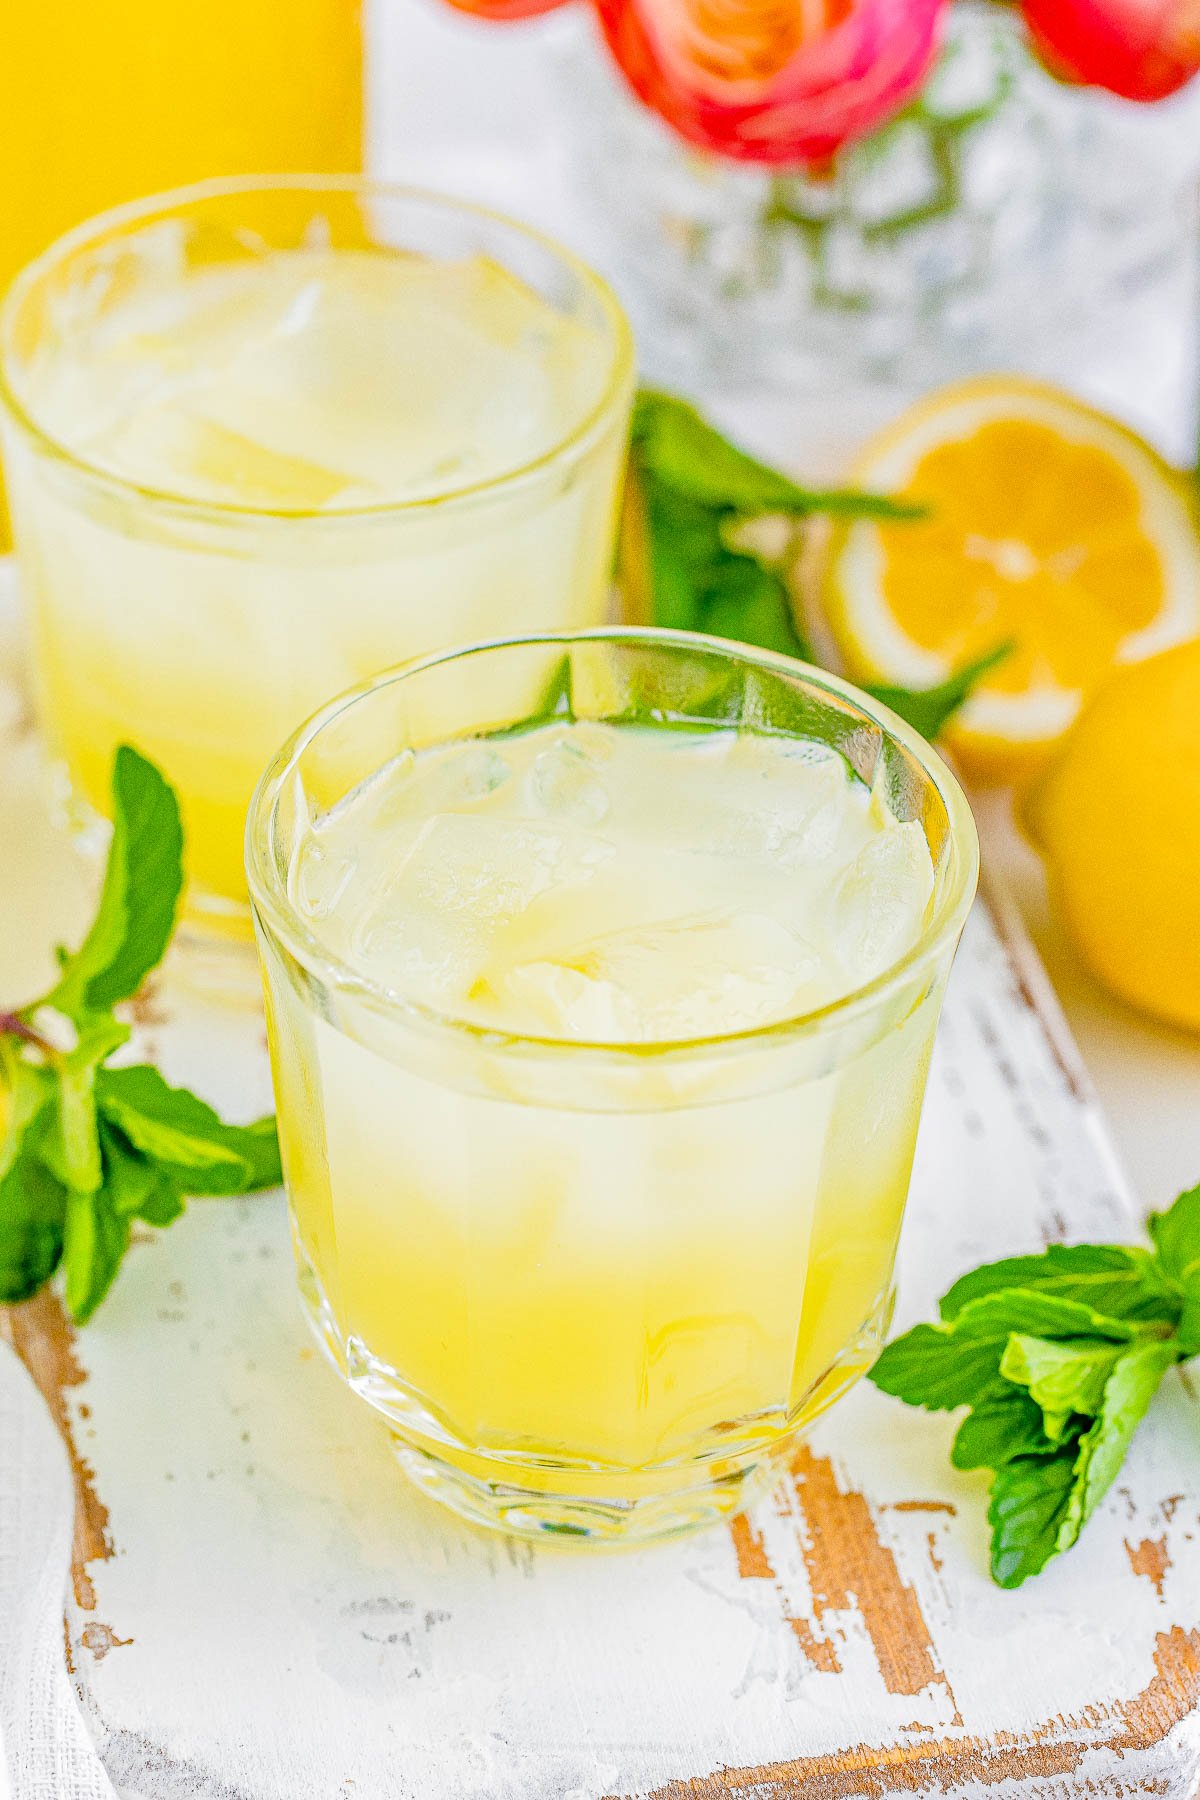 Two glasses of limoncello with ice, surrounded by fresh lemons and mint leaves on a rustic table.